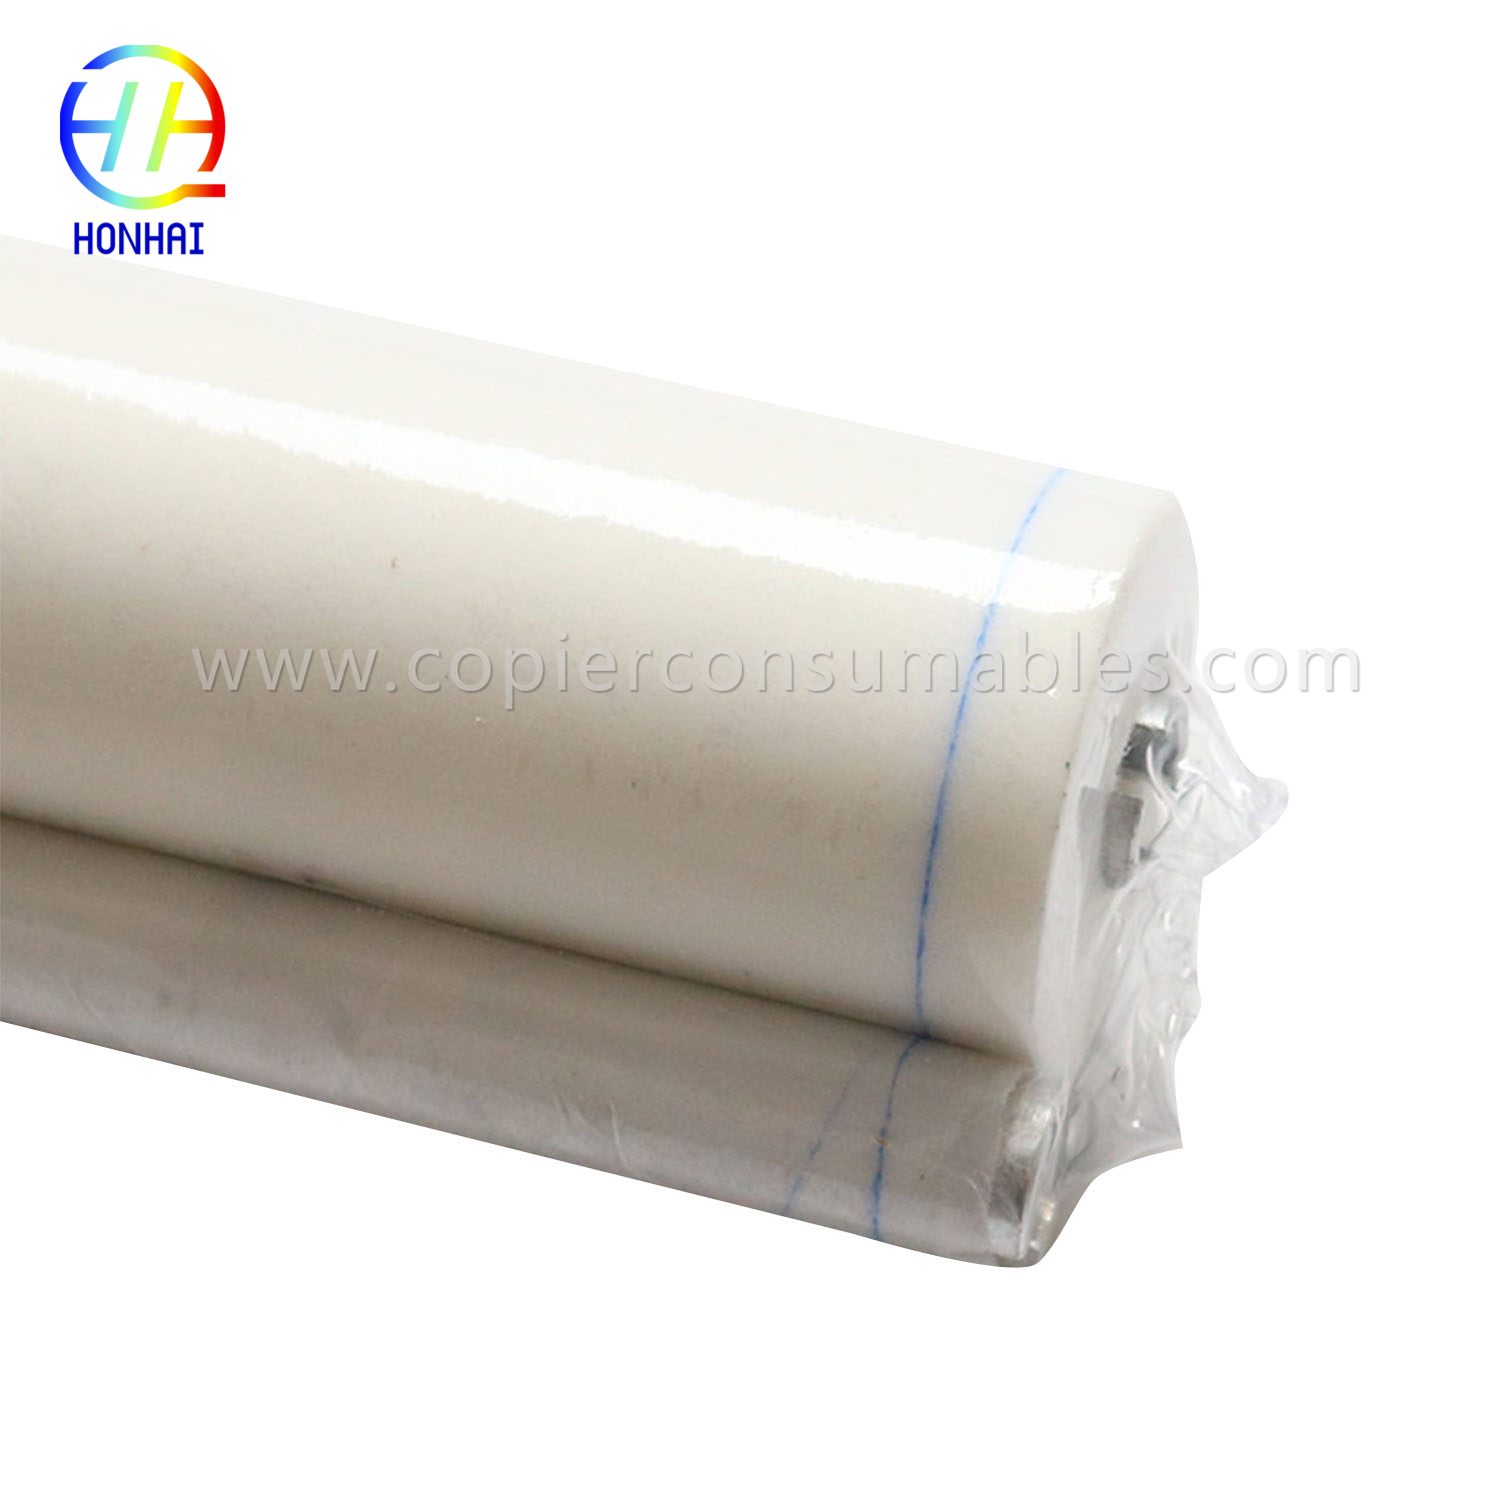 Web Cleaning Roller for Canon imageRUNNER 105 5000 5020 5050 5055 5065 5070 5075 550 5575 600 6000 6020 6570 7086 7065 7105 5055 5075 550 5575 600 6000 6020 6570 7086 7065 7105 5808 7010-720拷贝